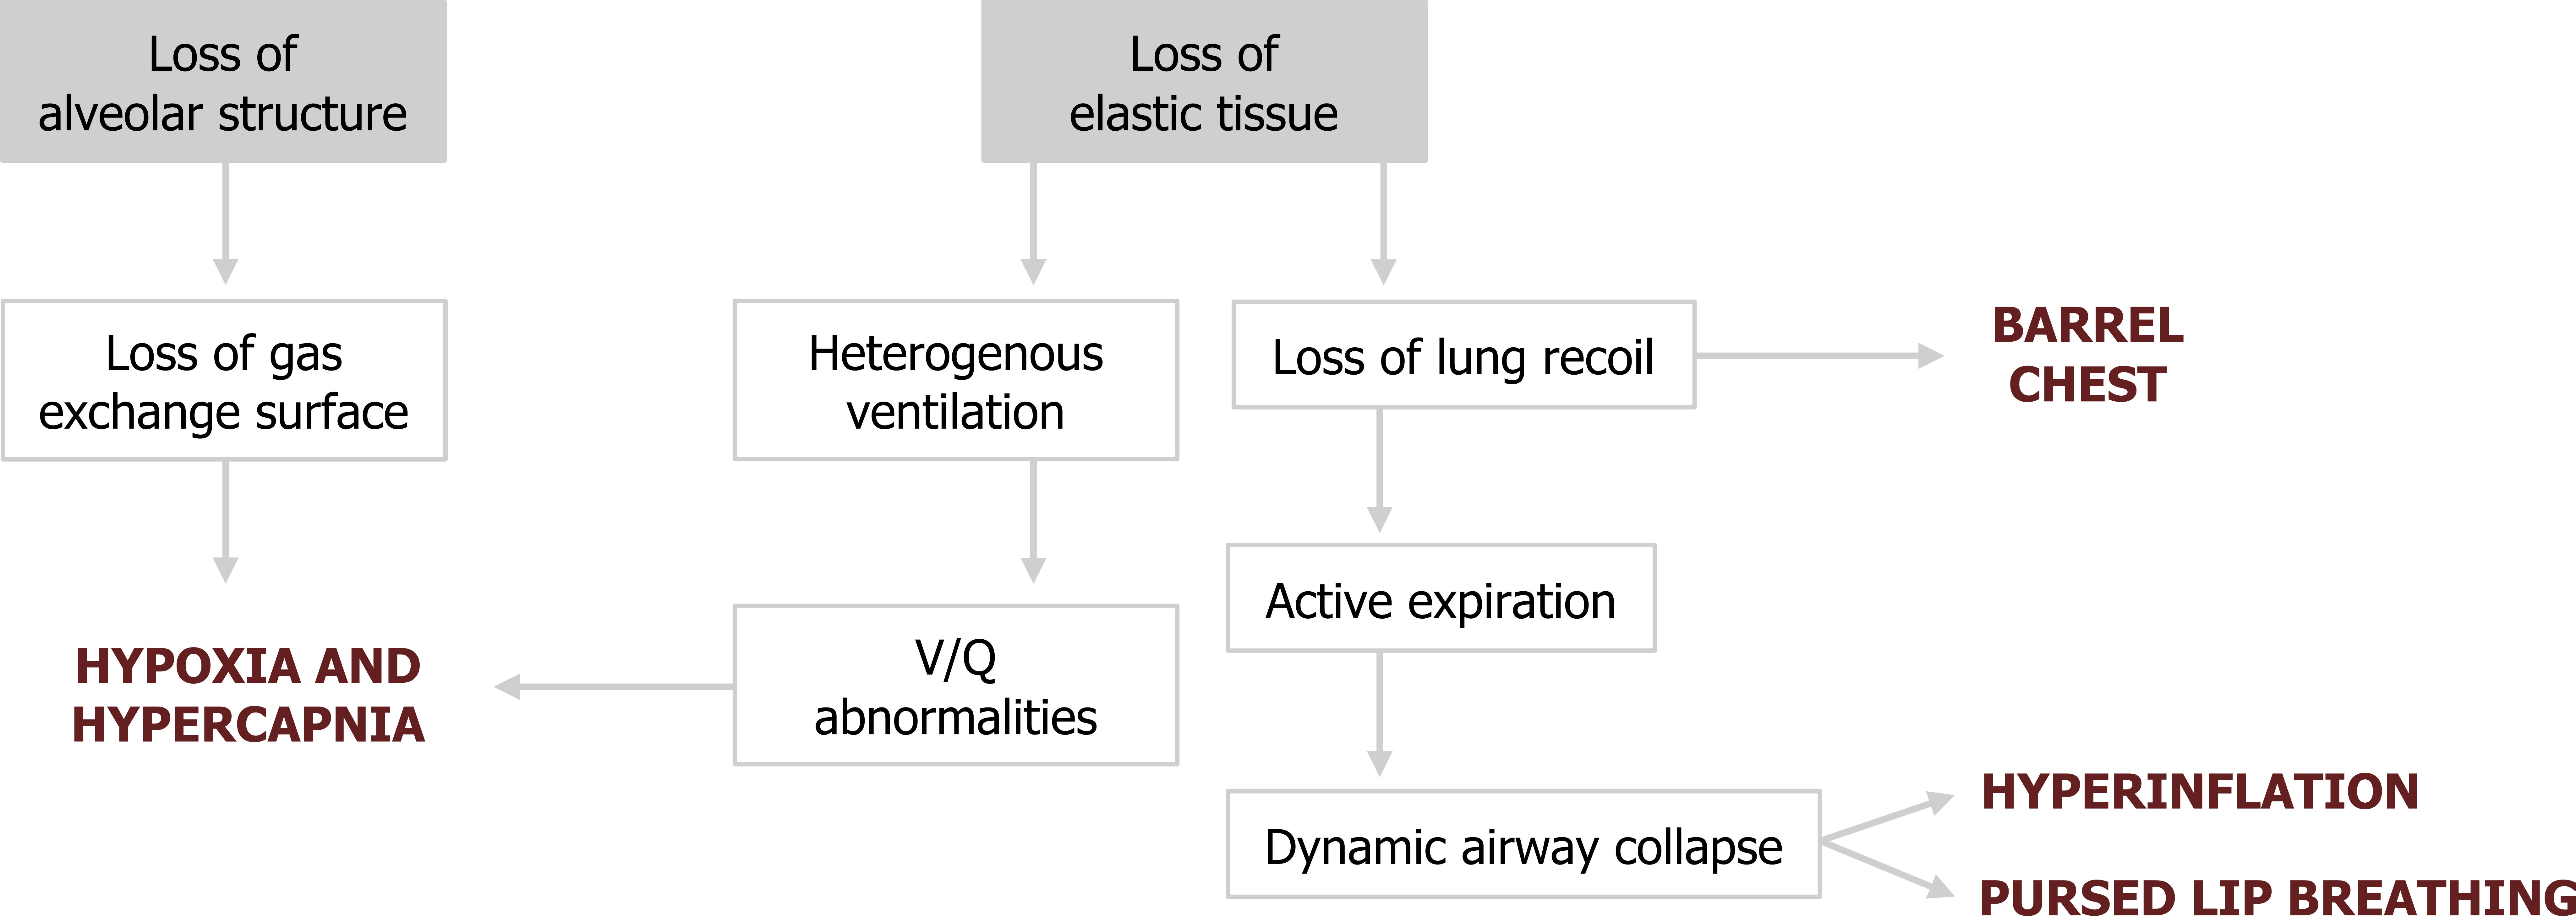 Loss of alveolar structure arrow to loss of gas exchange surface arrow to hypoxia and hypercapnia. Loss of elastic tissue arrow to heterogeneous ventilation arrow to V/Q abnormalities arrow to hypoxia and hypercapnia. Loss of elastic tissue arrow to loss of lung recoil arrow to active expiration arrow to dynamic airway collapse arrows to hyperinflation and pursed lip breathing. Loss of lung recoil arrow to barrel chest.